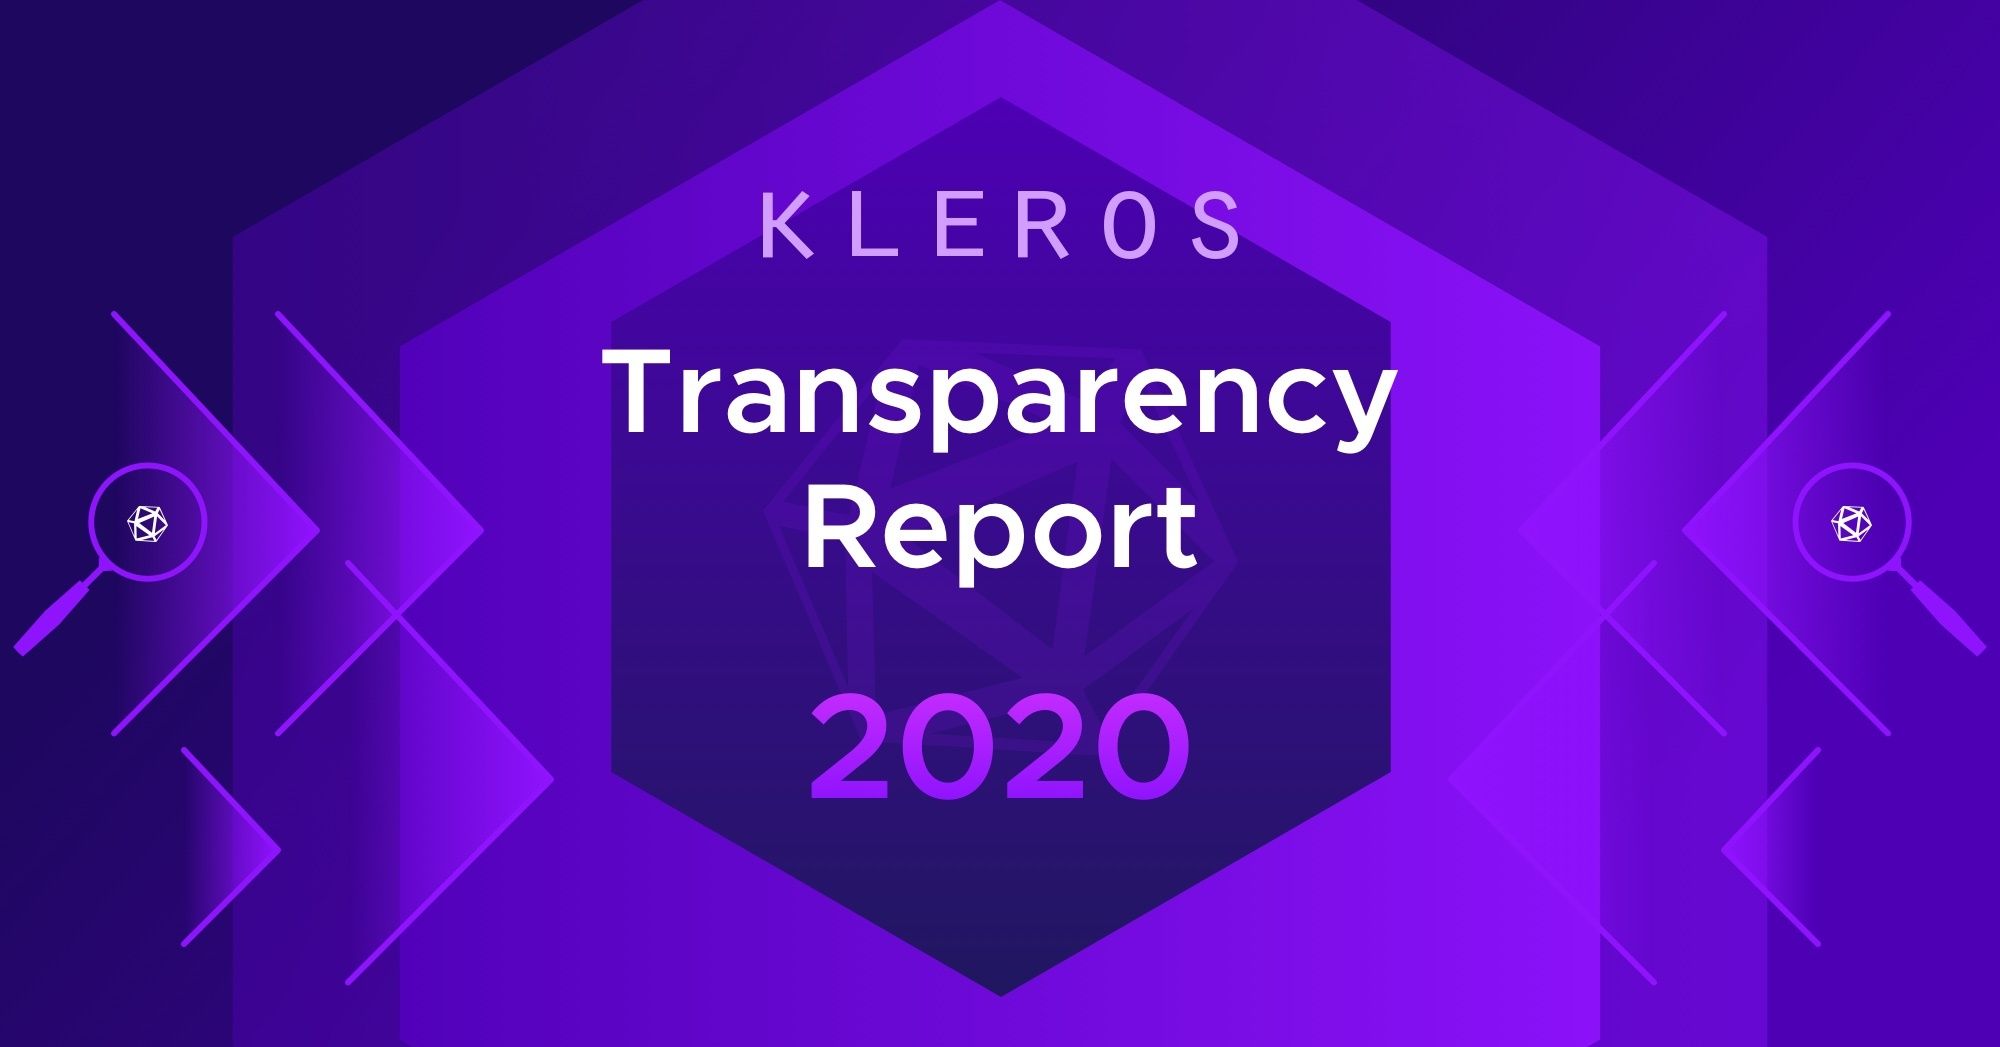 Kleros Annual Transparency Report 2020